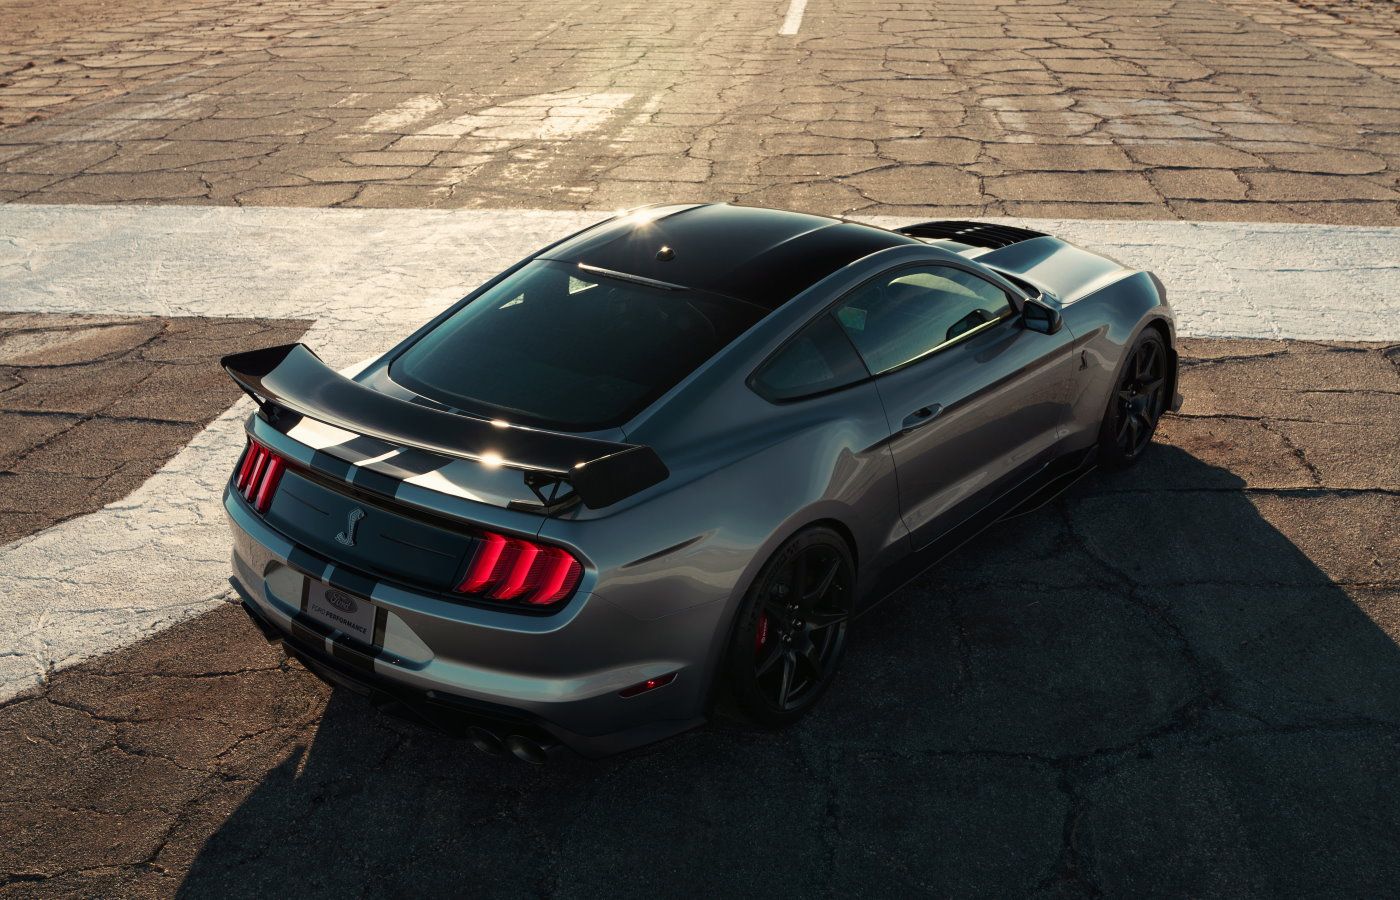 The all-new Shelby GT500???the pinnacle of any pony car ever engineered by Ford Performance???delivers on its heritage with more than 700 horsepower for the quickest street-legal acceleration and most high-performance technology to date ever offered in a Ford Mustang.